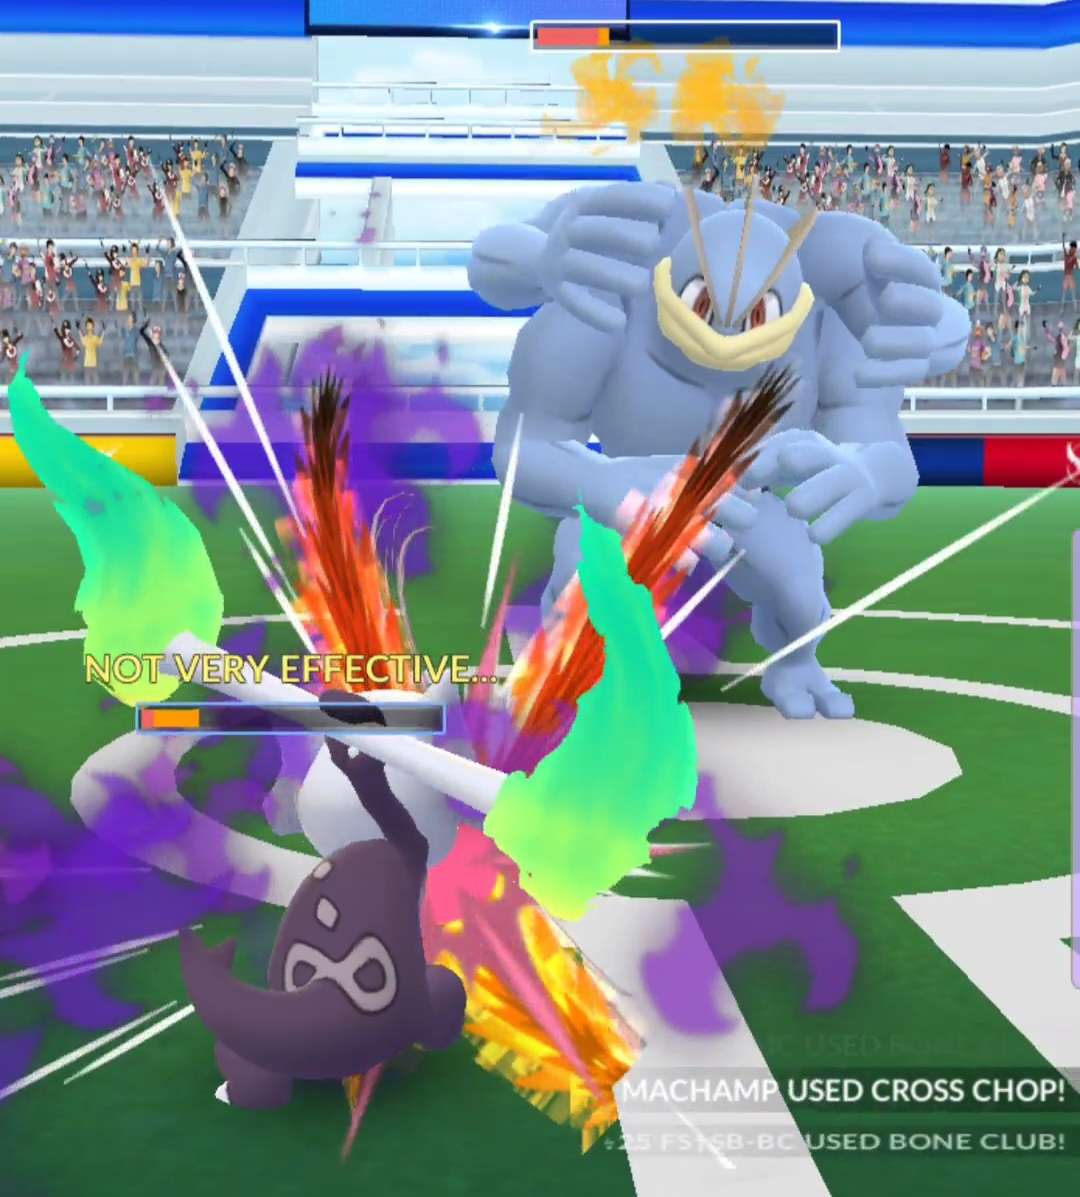 Cross Chop: Machamp Move Effect and Cooldown